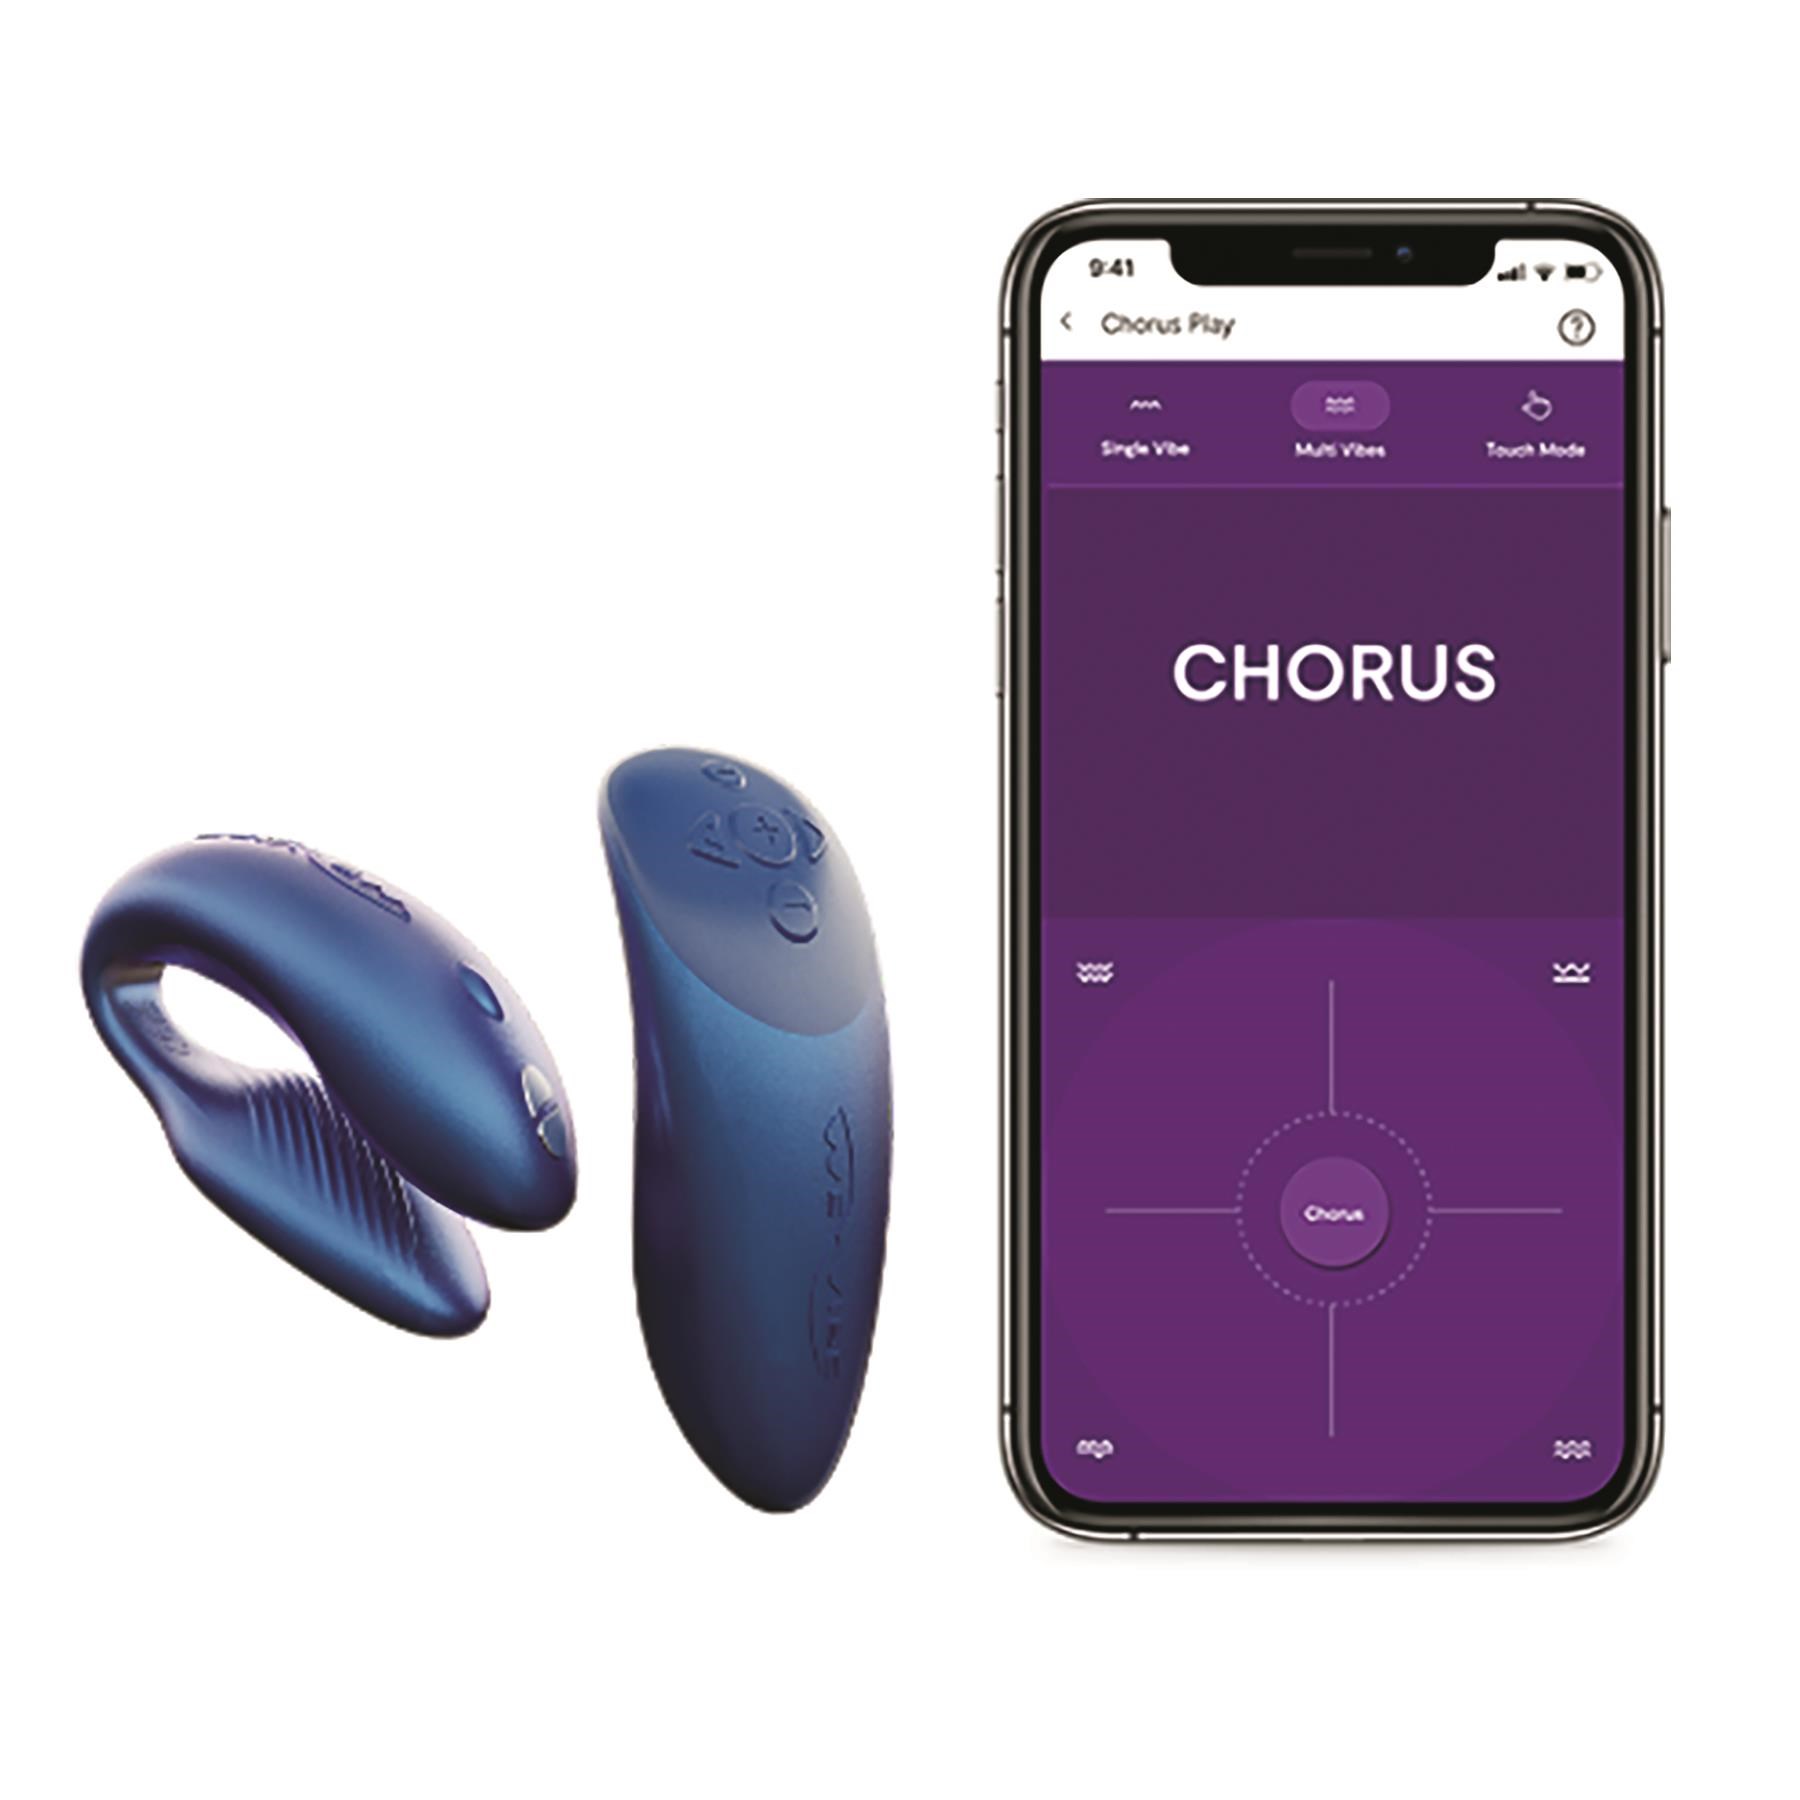 We-Vibe Chorus Couples Massager - Showing Phone with App